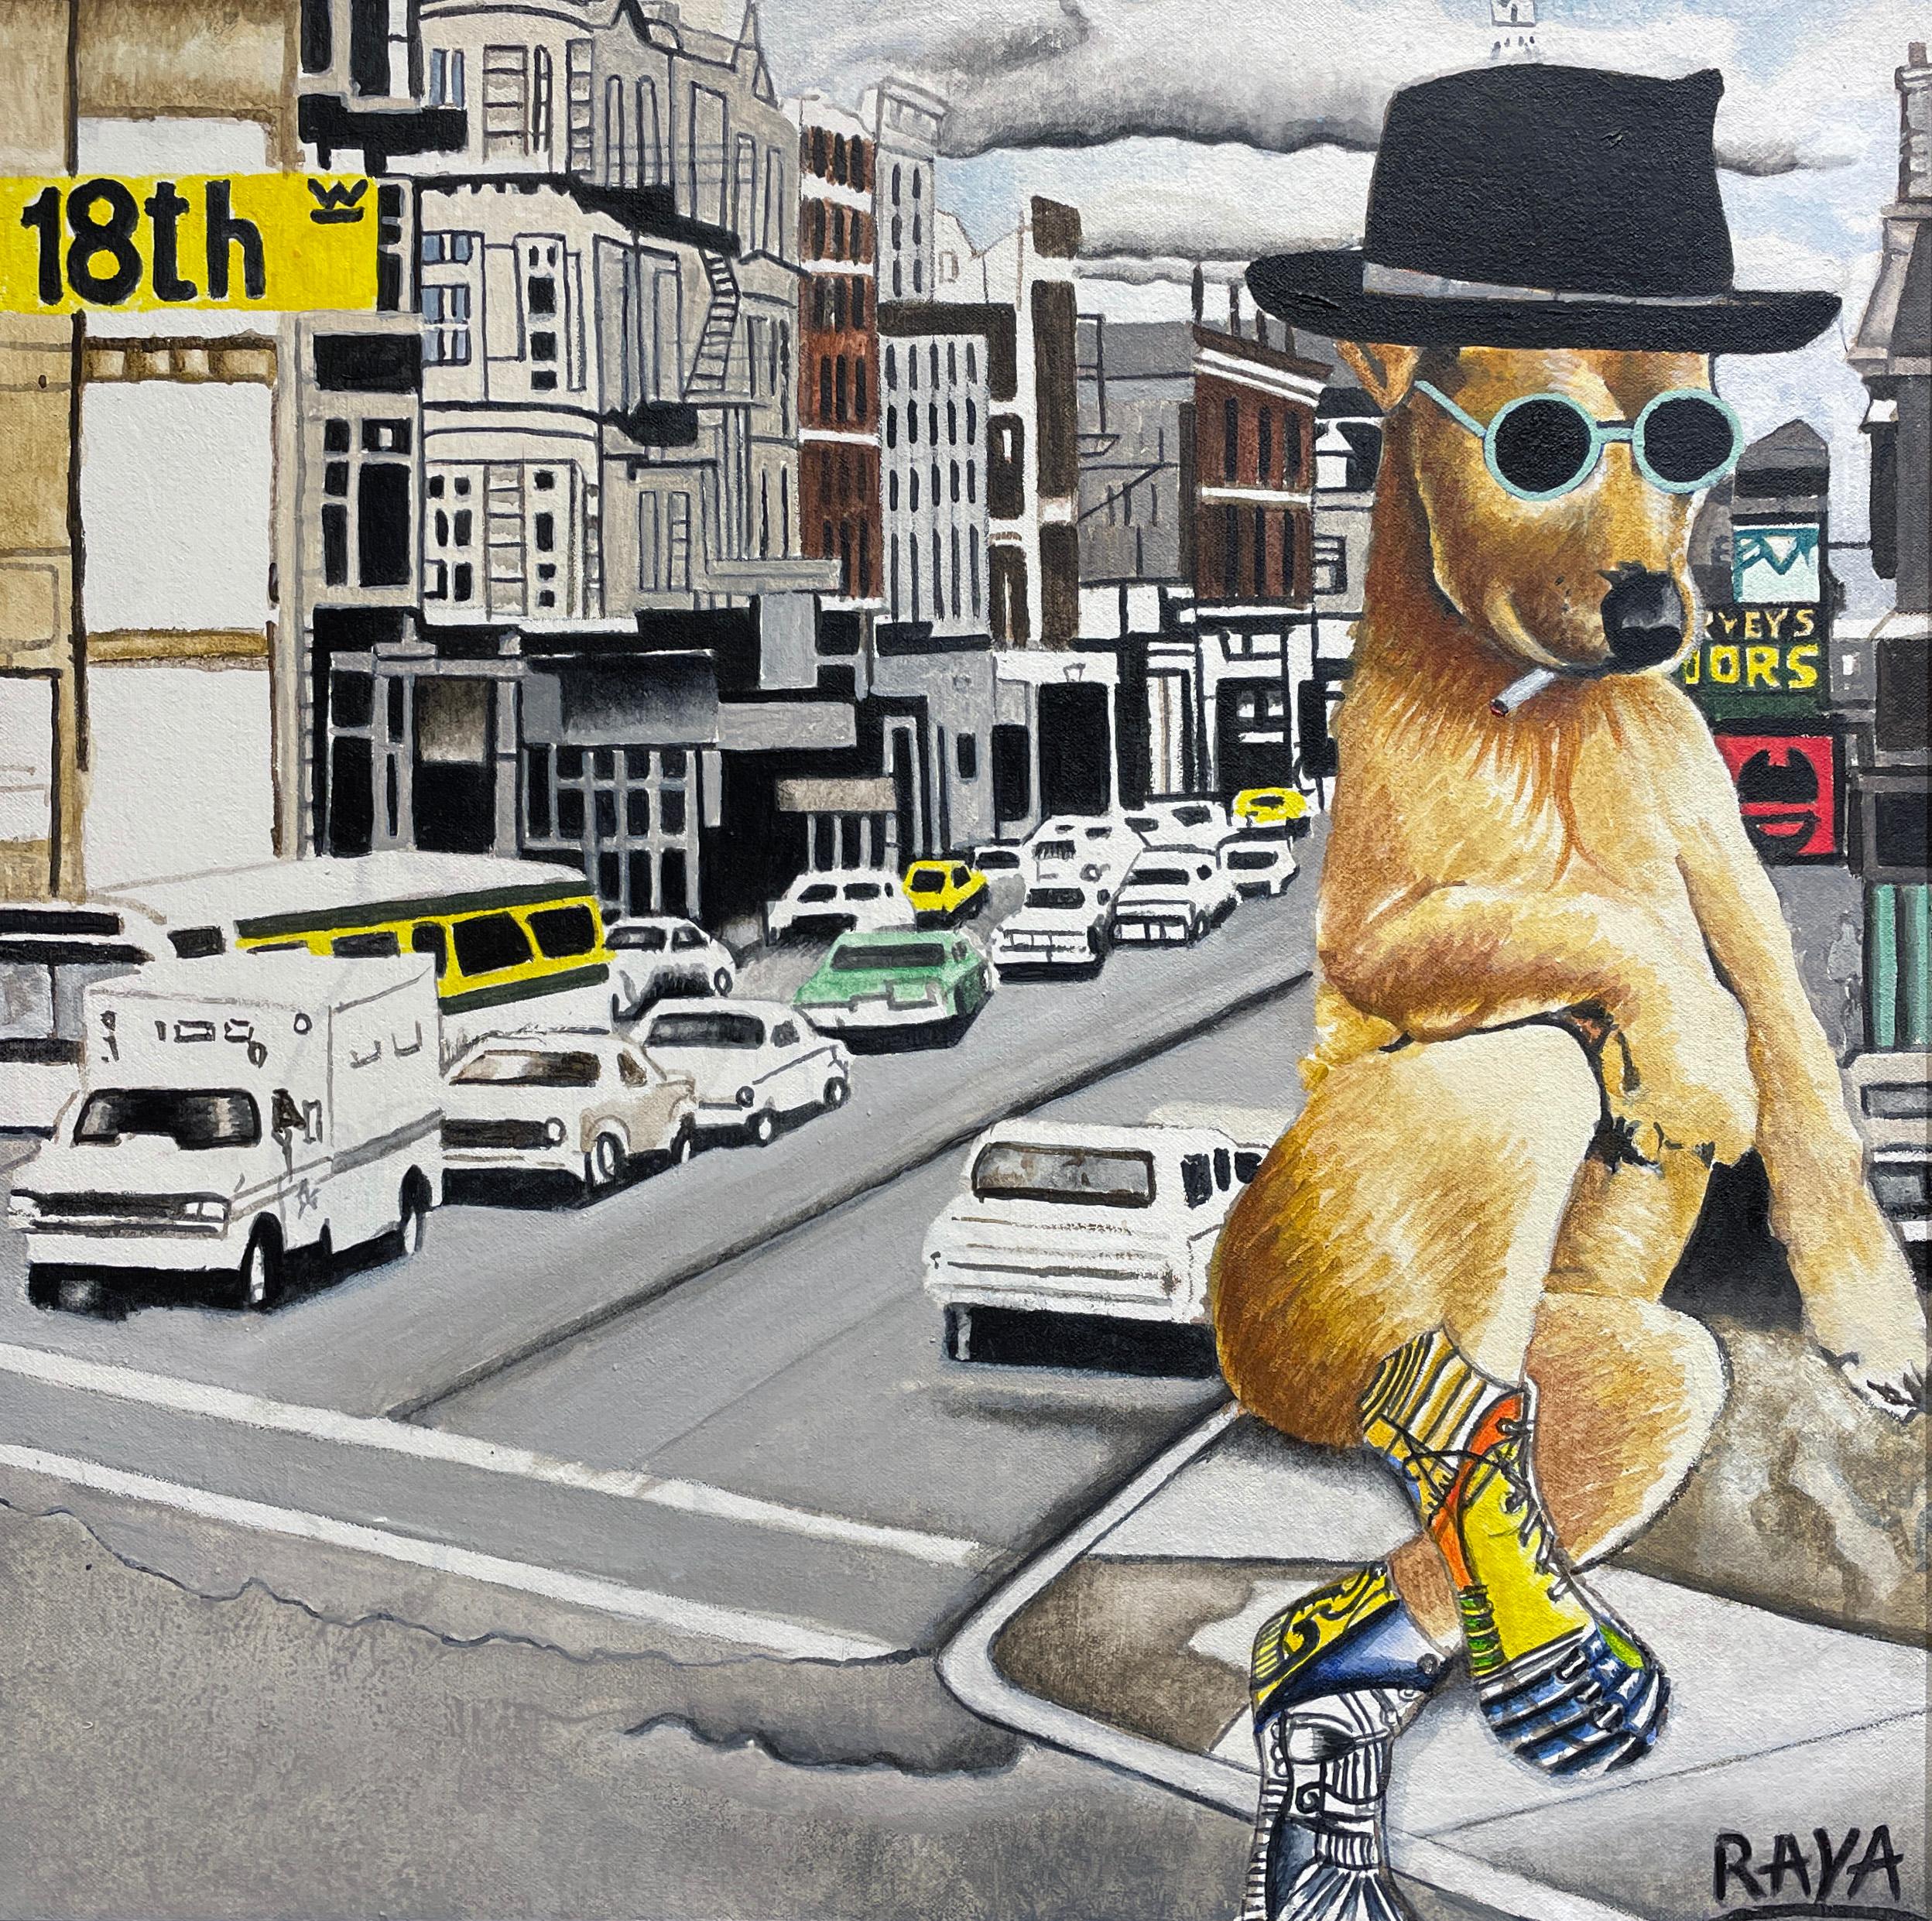 Dog Years - Self Portrait of Artist as a Dog Juxtaposed Against a Cityscape - Painting by Marcos Raya